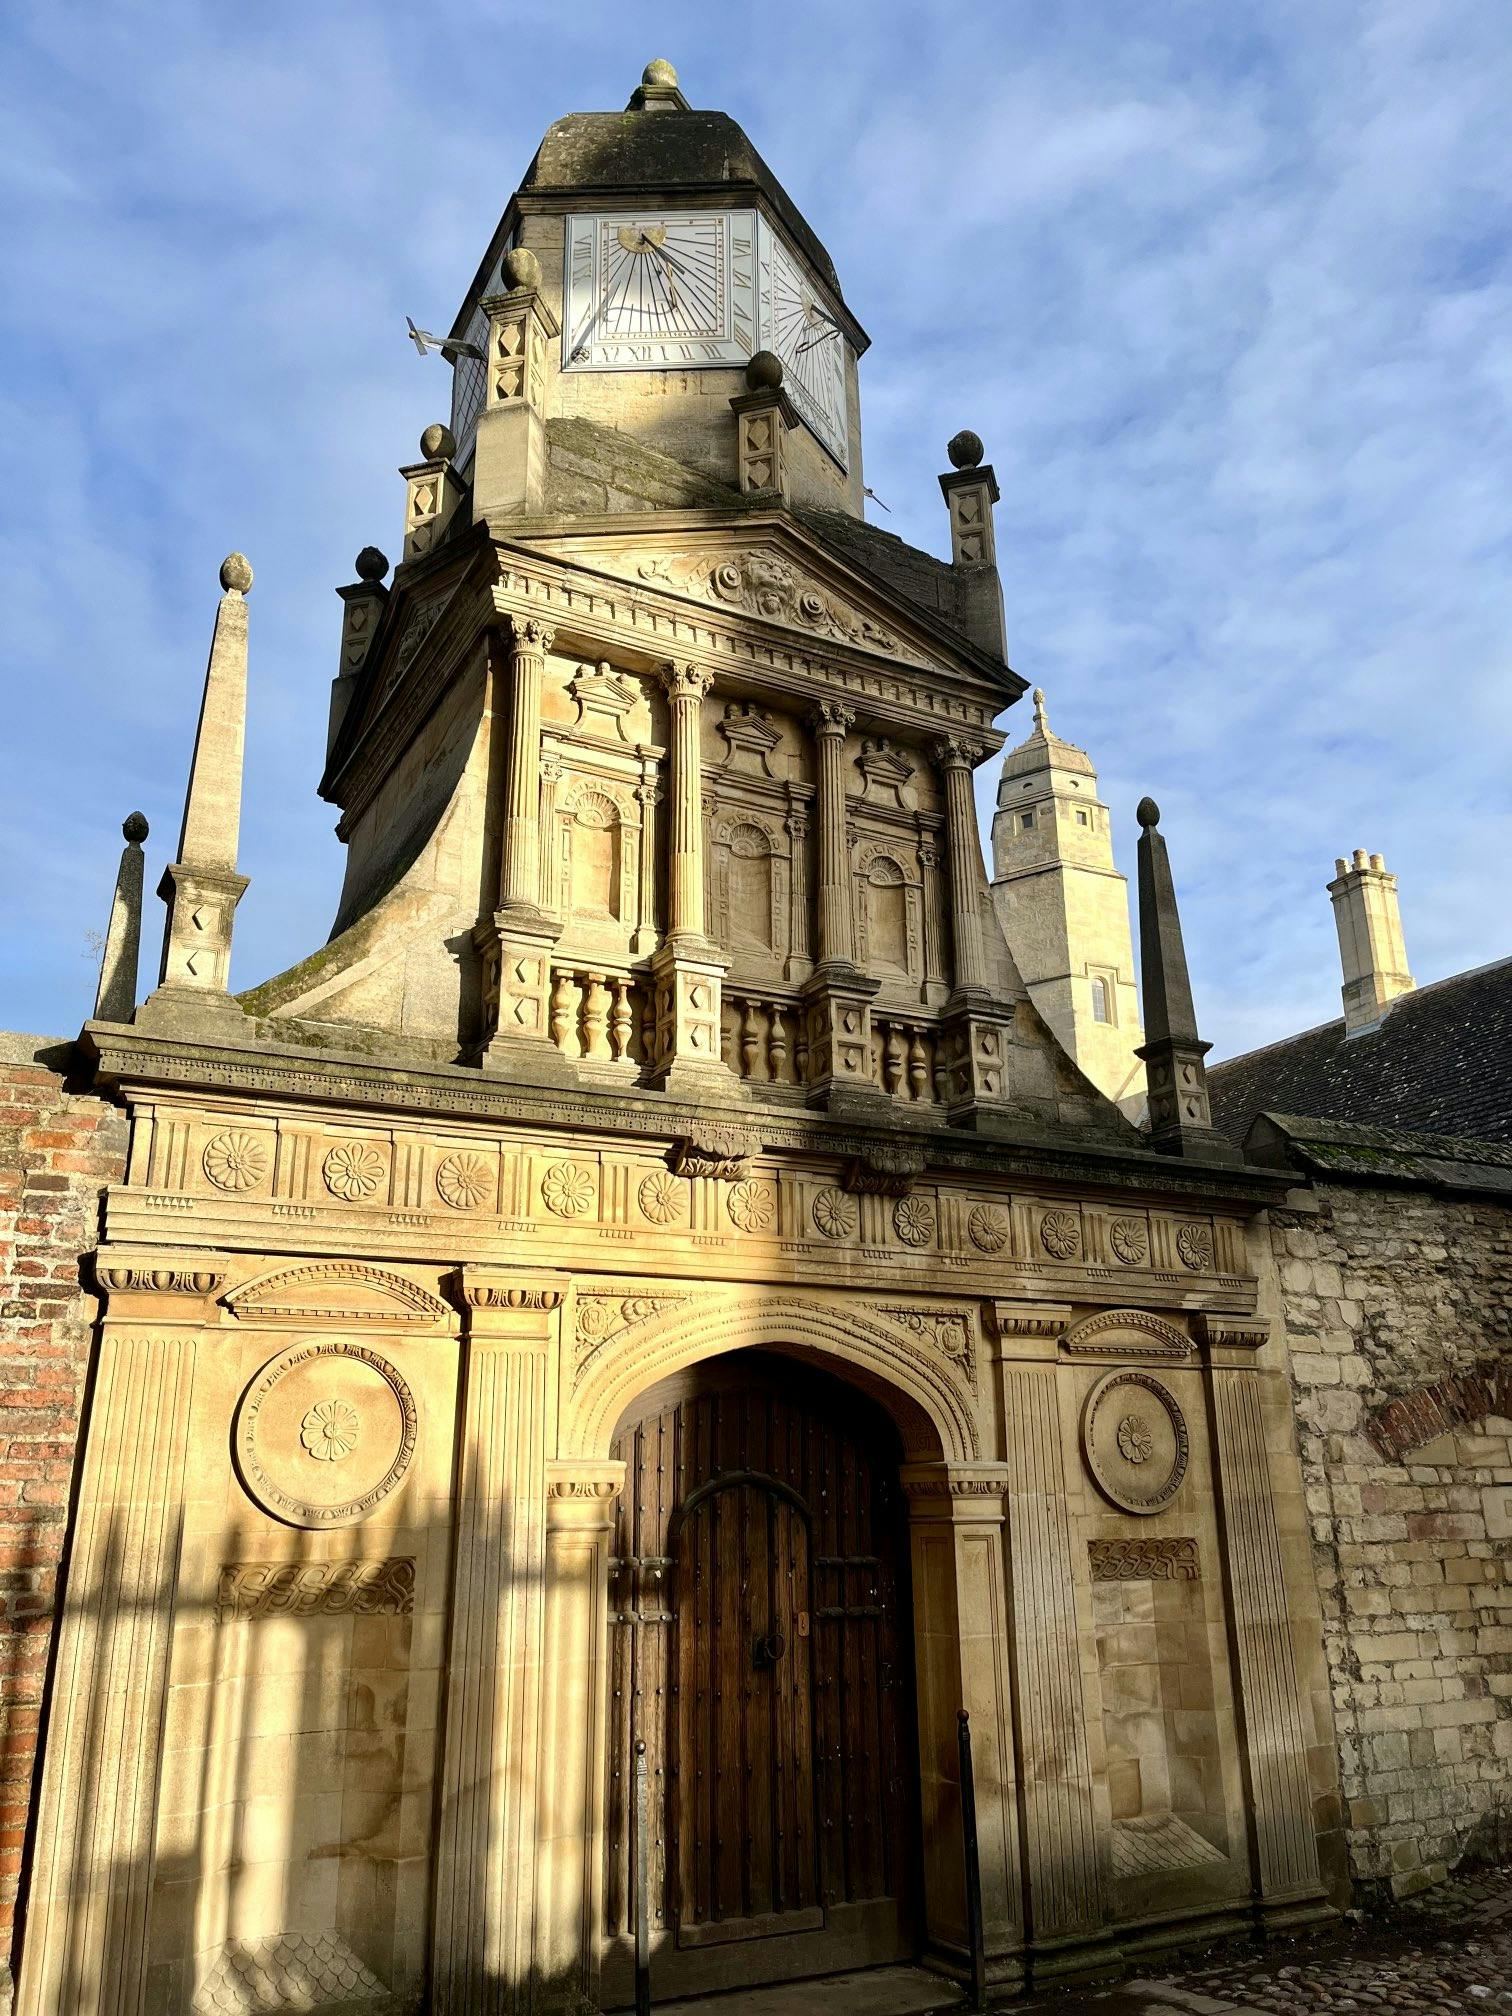 <p>The Gate of Honour is a historical landmark in Cambridge, England. It is one of the three gates that were designed by John Caius, the founder of Gonville and Caius College, in the 16th century. The other two gates are the Gate of Humility and the Gate of Virtue.</p><p><br></p><p>The Gate of Honour is a small triumphal arch that symbolizes the academic achievement of the students who pass through it. It is only used for special occasions, such as graduation ceremonies, when the students walk from the college to the Senate House to receive their degrees.</p><p><br></p><p>The Gate of Honour is decorated with various sculptures and inscriptions, such as the coat of arms of the college, the motto of John Caius, and the figures of the four evangelists. The gate is also adorned with the initials of John Caius and the date of its completion, 1573.</p><p><br></p><p>The Gate of Honour is considered a masterpiece of Renaissance architecture, and it was probably influenced by the Flemish architect Theodore de Have, who worked with John Caius on other projects. The gate is regarded as one of the most beautiful and iconic structures in Cambridge, and it has been featured in many books, paintings, and photographs.</p><p><br></p><p>The Gate of Honour has also been a target of vandalism and protest, such as when it was spray-painted by Extinction Rebellion activists in 2020, who demanded that the college divest from fossil fuels. The college condemned the act and said that it would cost thousands of pounds to restore the gate.</p>